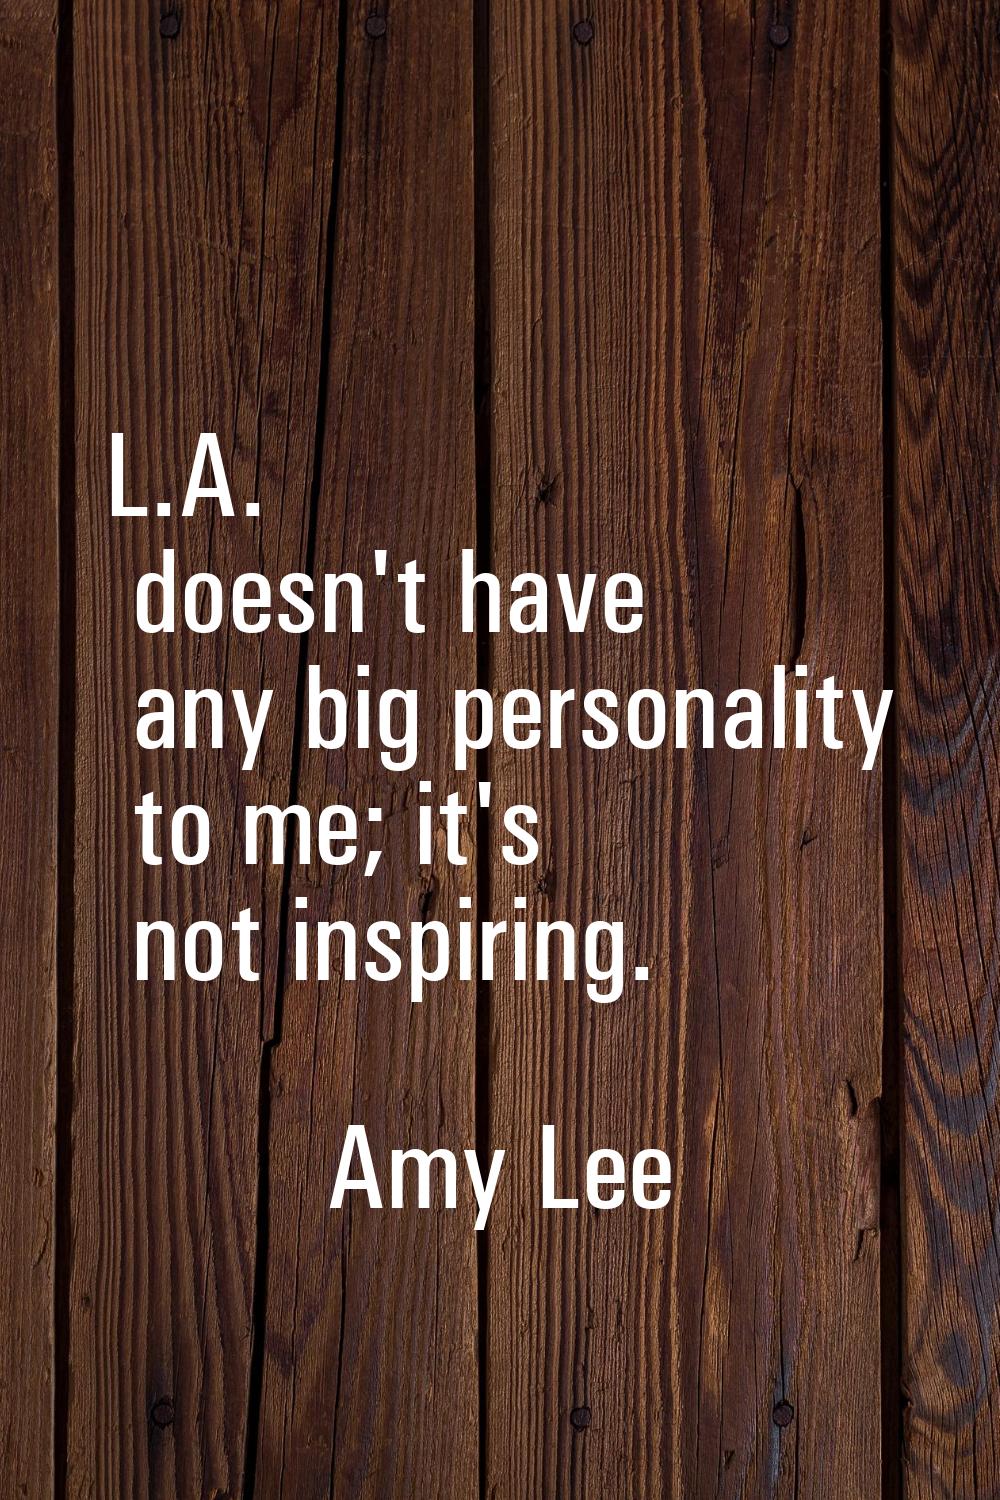 L.A. doesn't have any big personality to me; it's not inspiring.